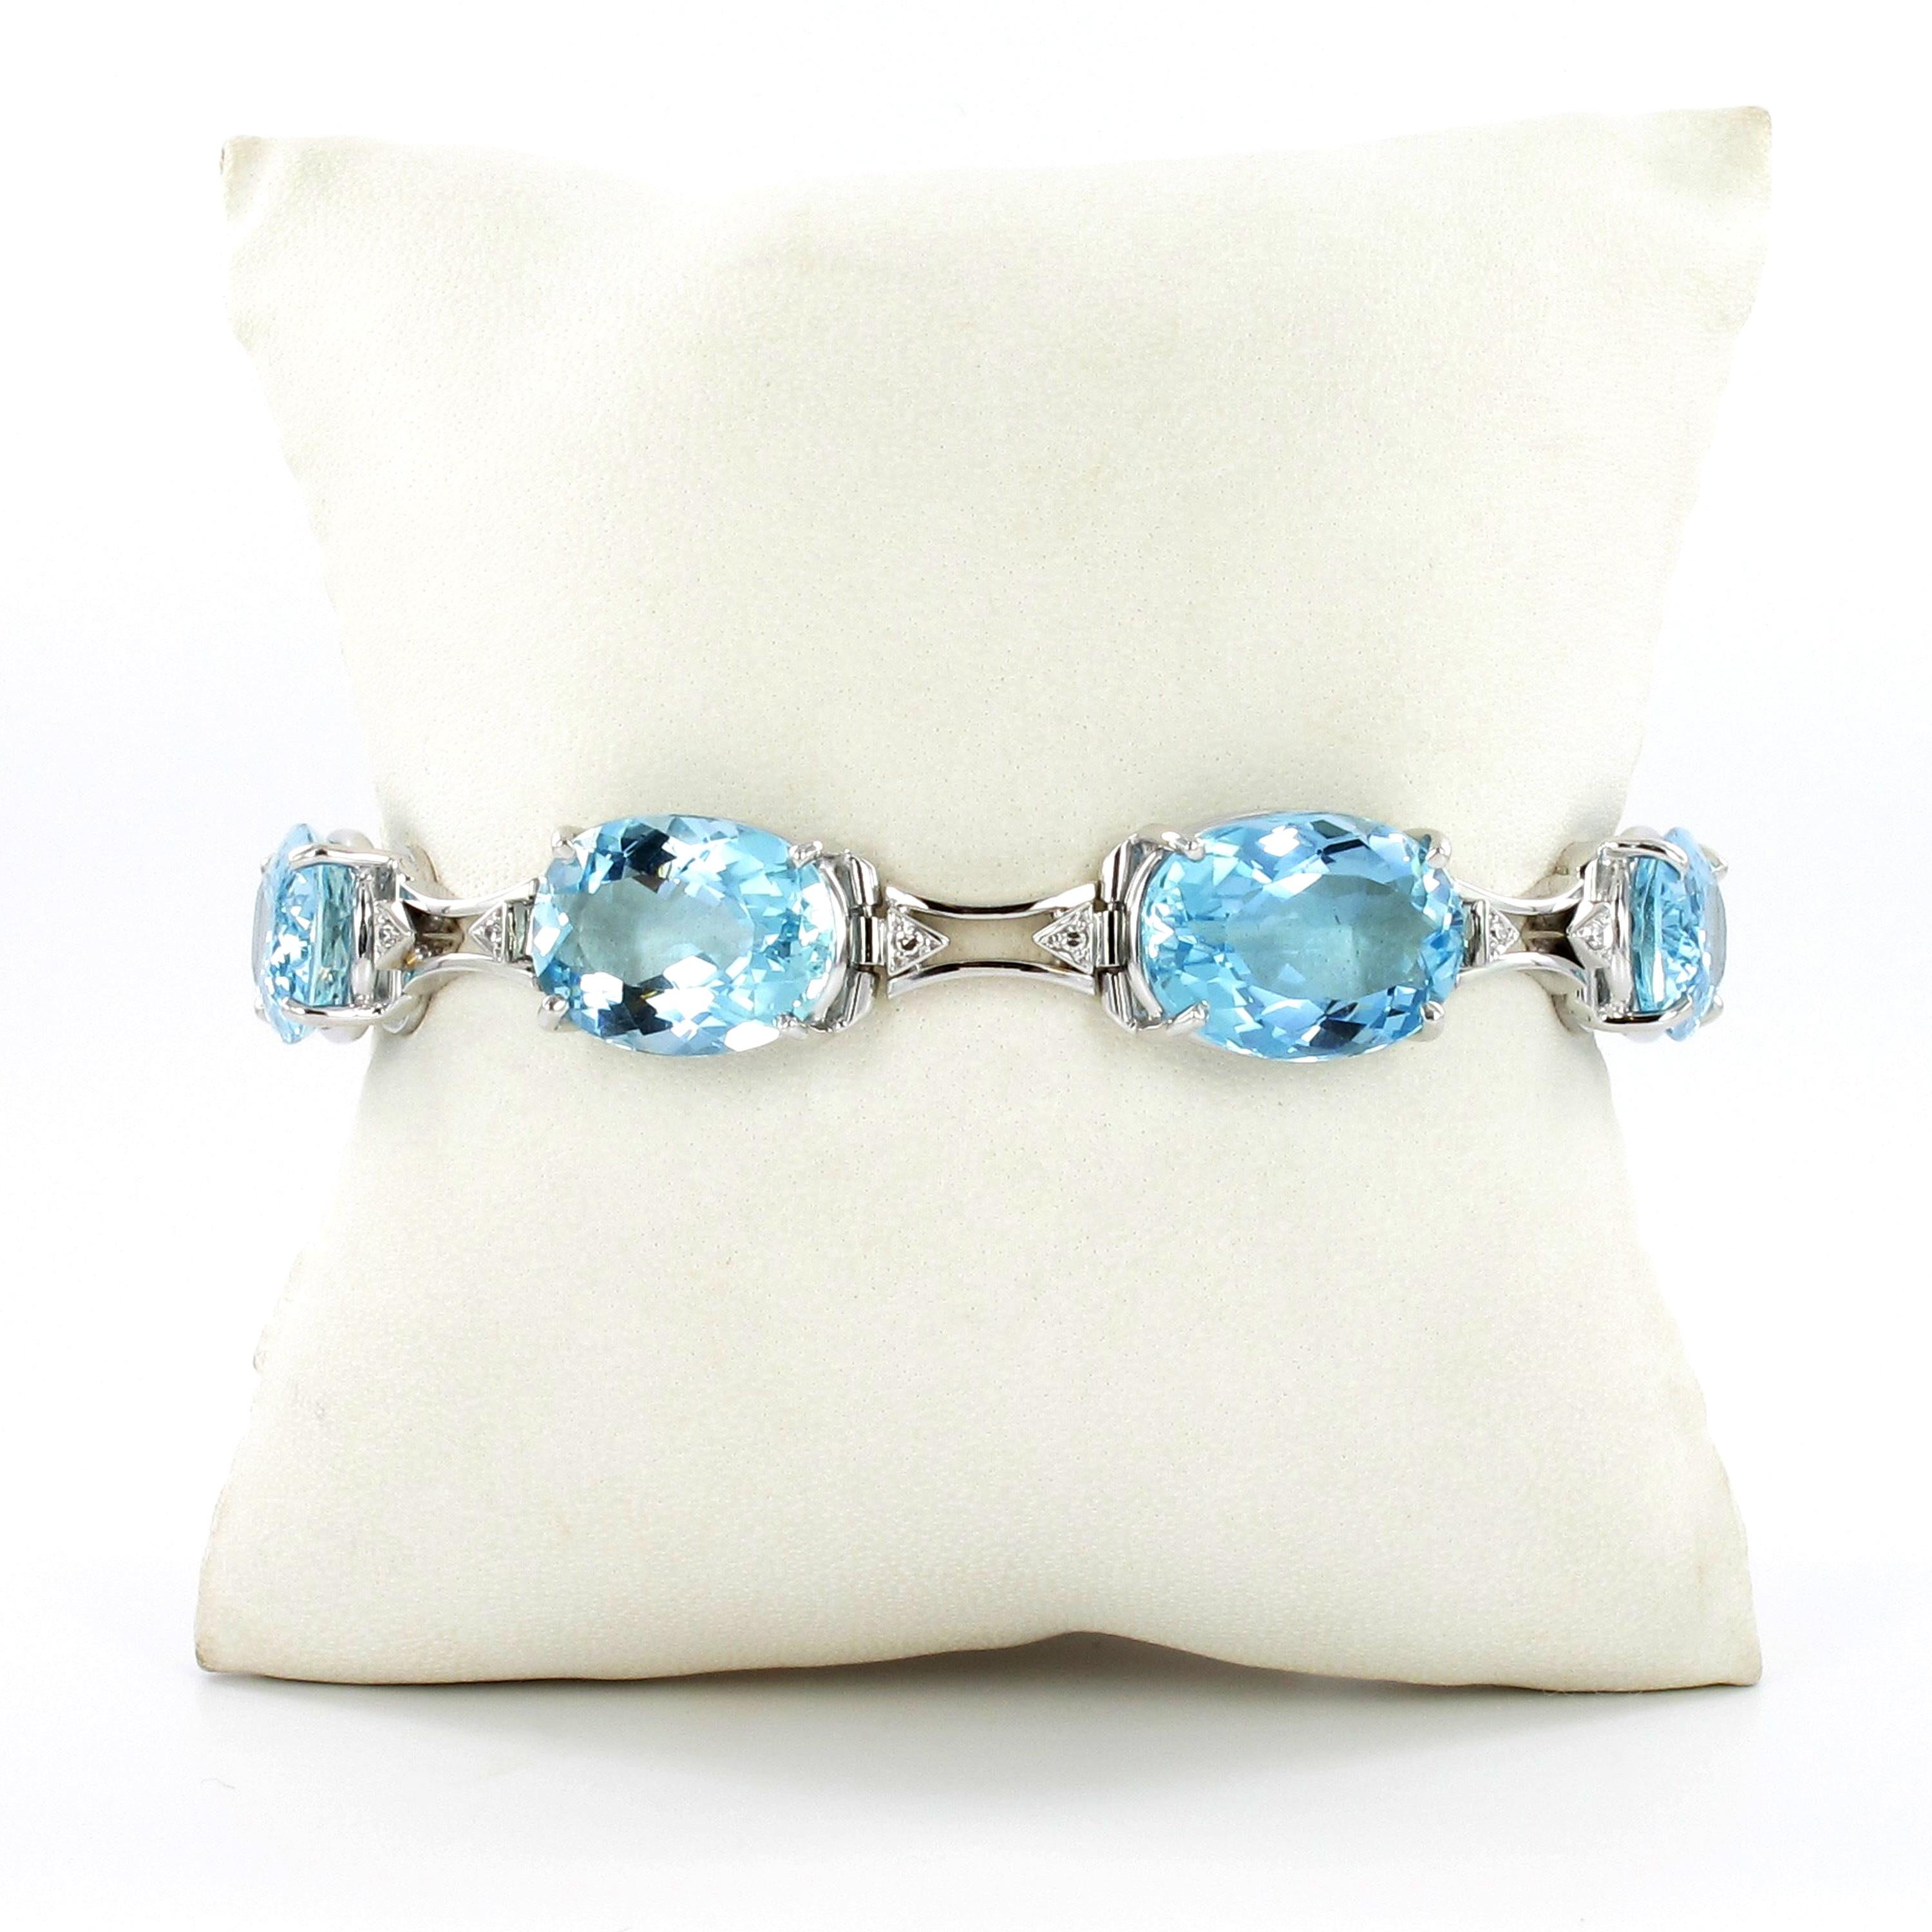 This timelessly elegant bracelet by reknown jeweller H. Stern features seven oval shaped aquamarines of high claritiy and vibrant luster. Their total weight is approximately 46.80 carats. Each aquamarine is accented by two single cut diamonds of G/H